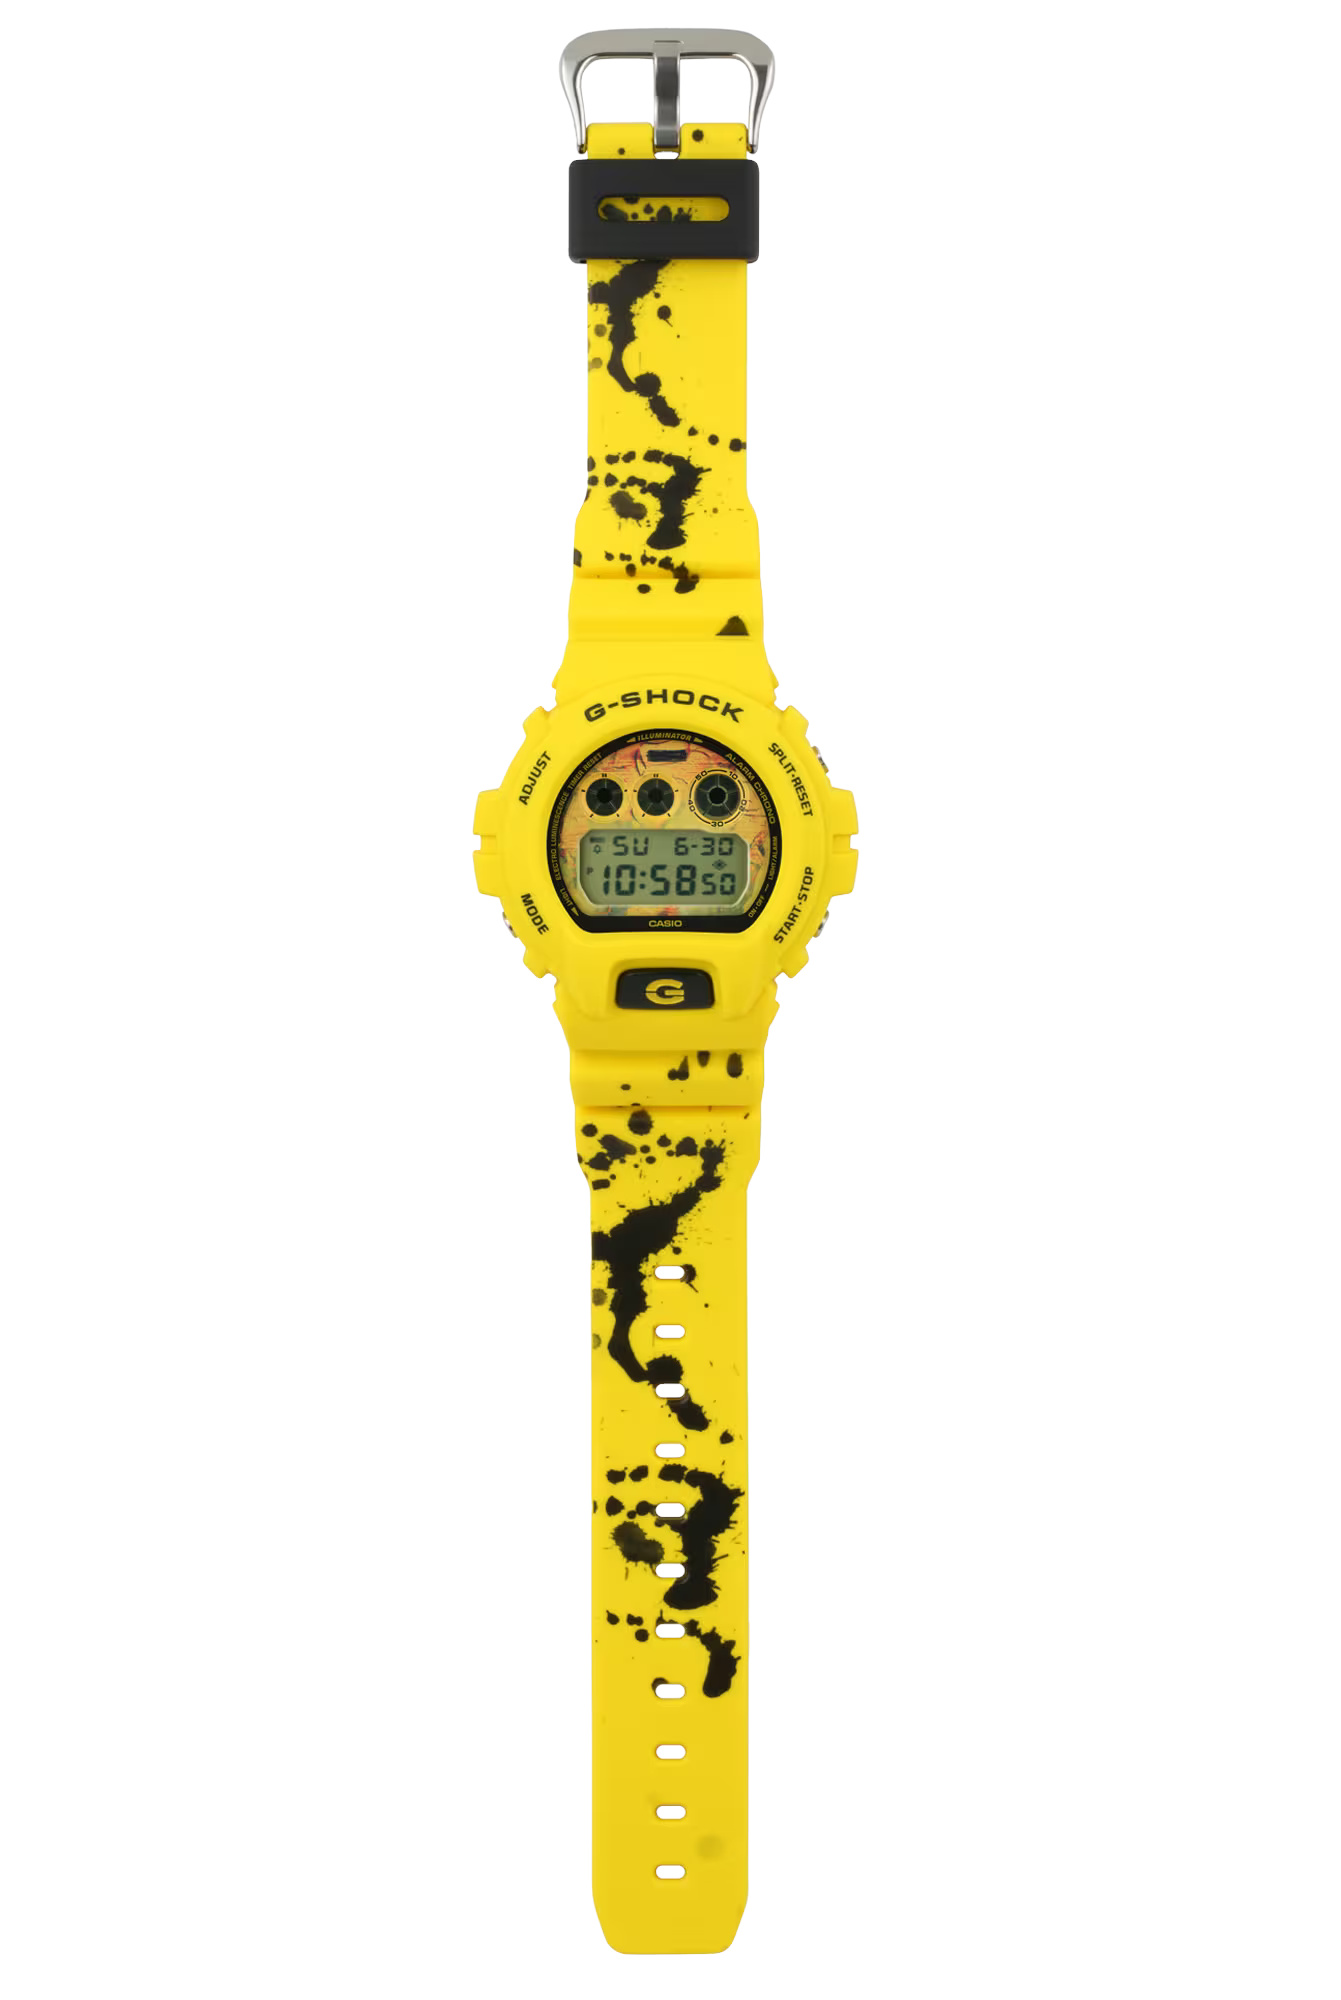 New Hodinkee G-Shock collaboration with Ed Sheeran is inspired by